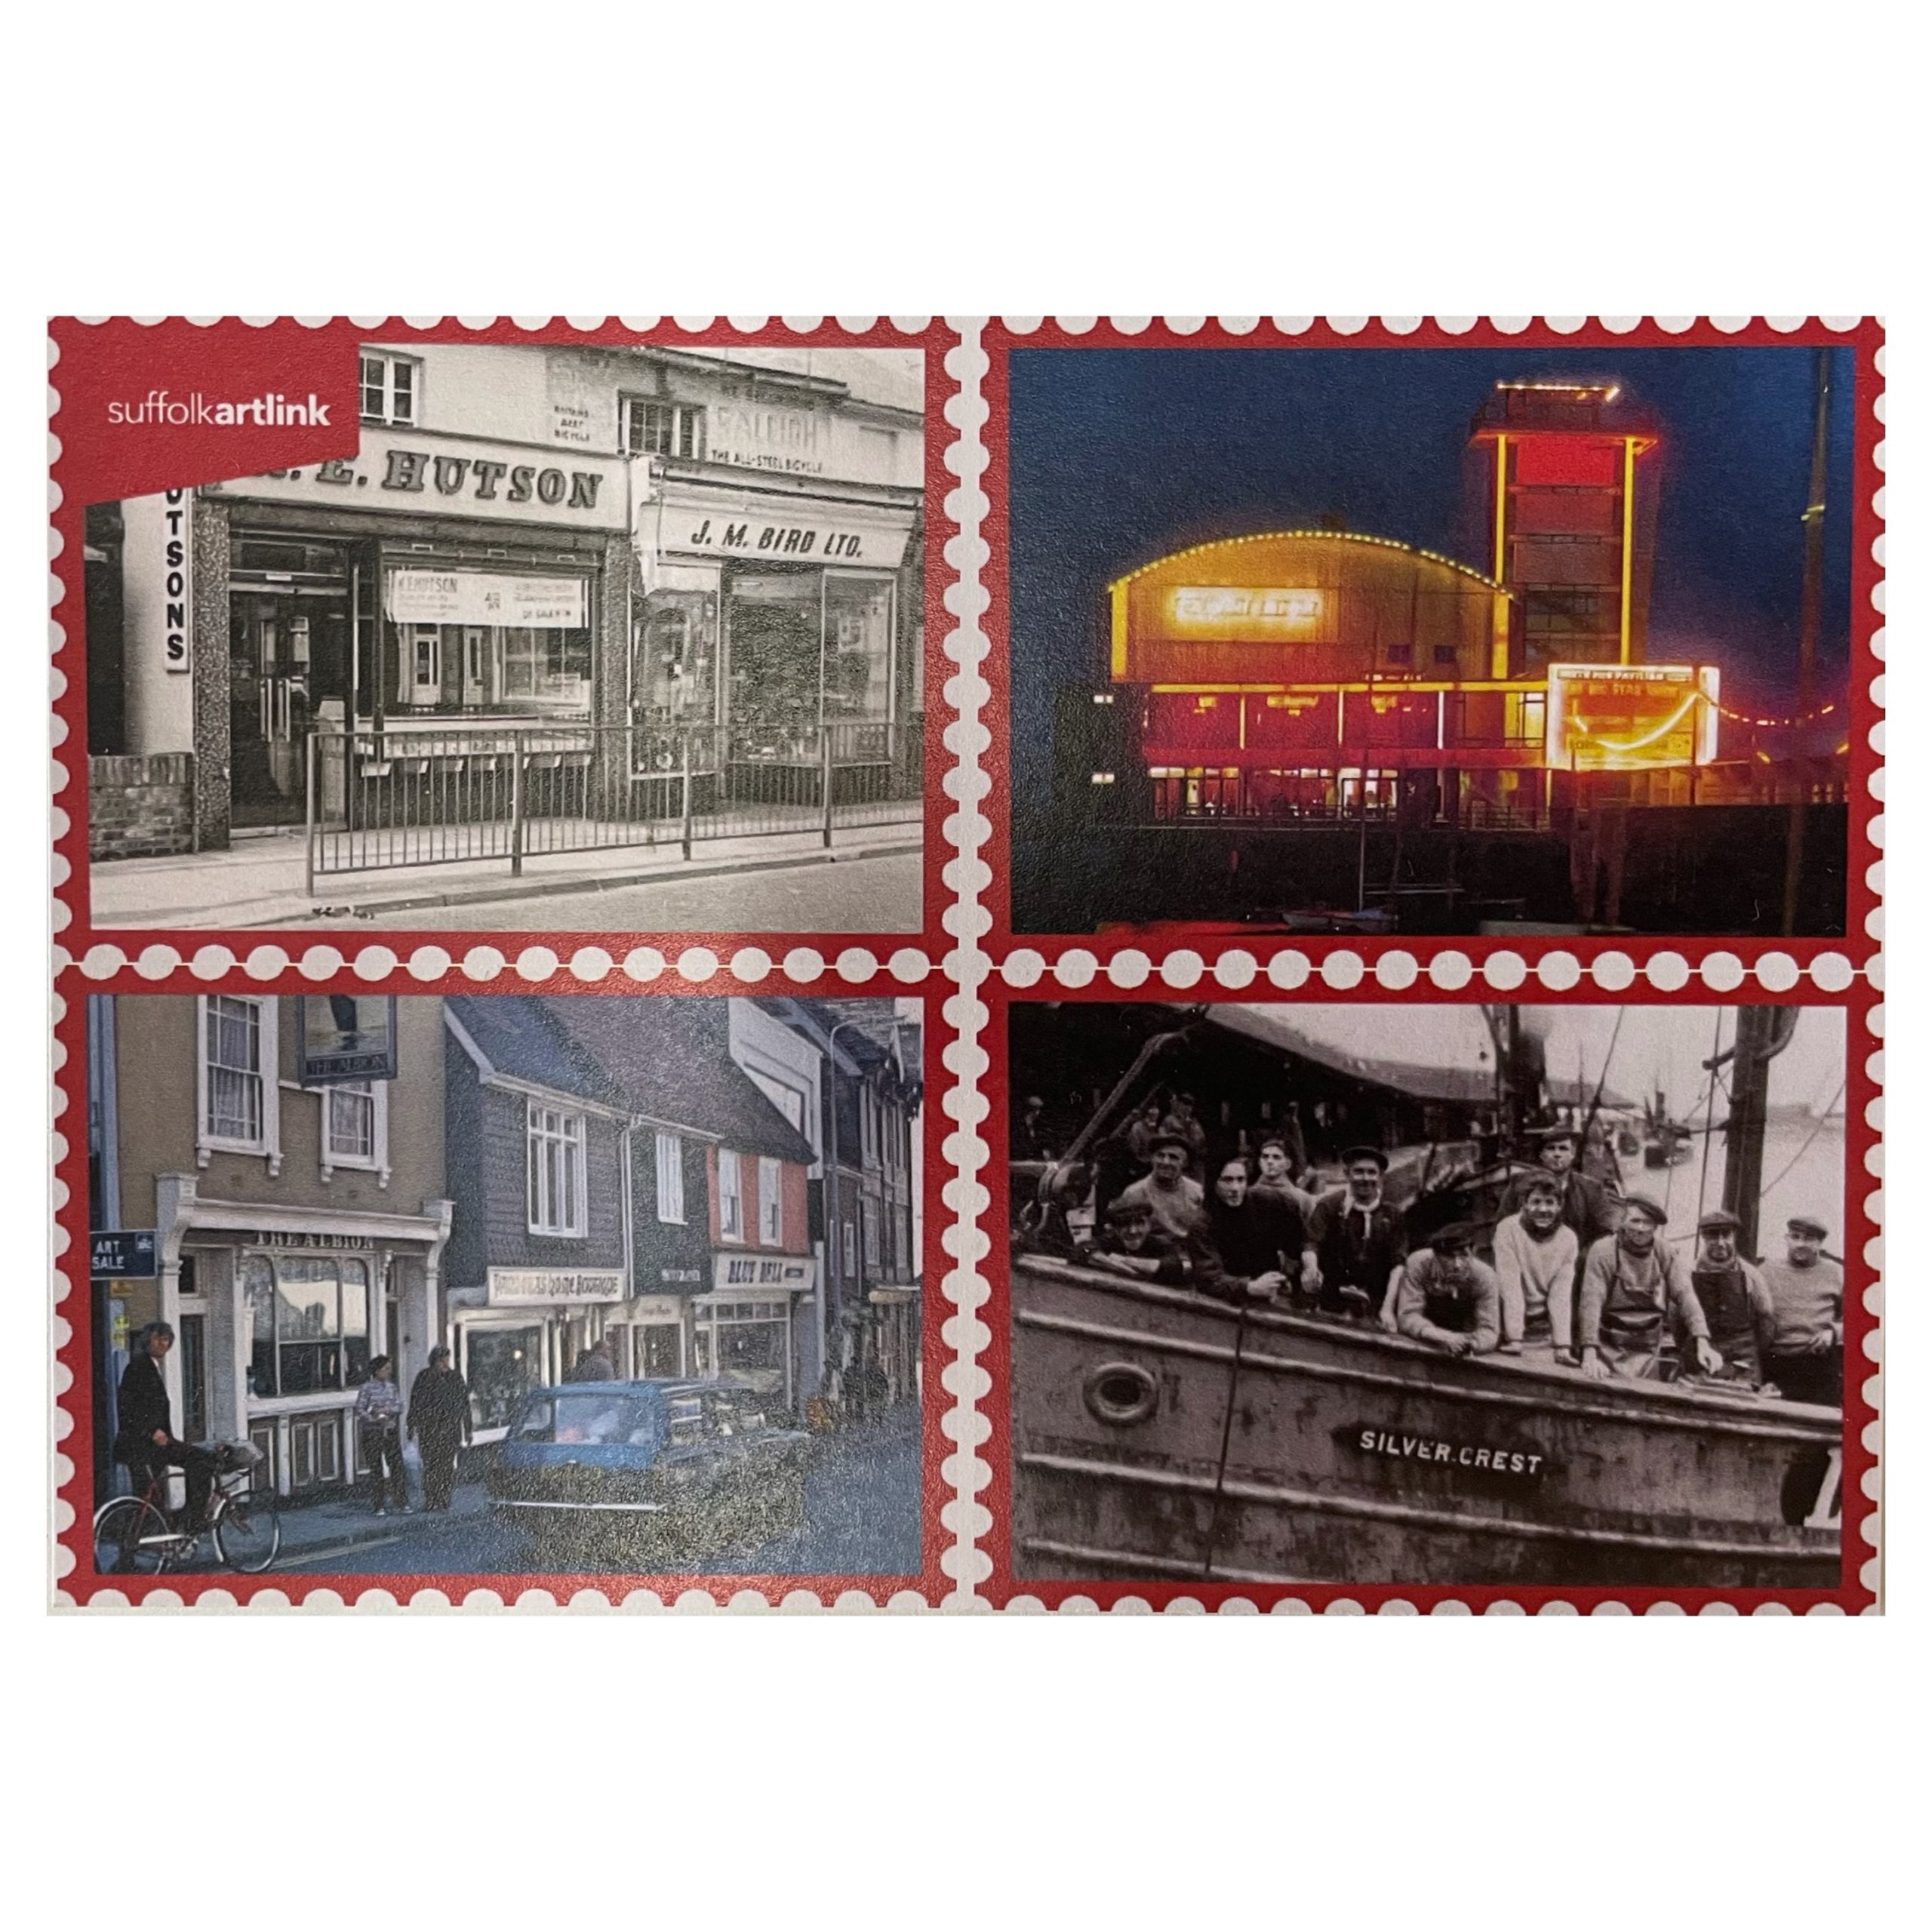 Lowestoft postcard with stamps featuring old images of Lowestoft in each corner.